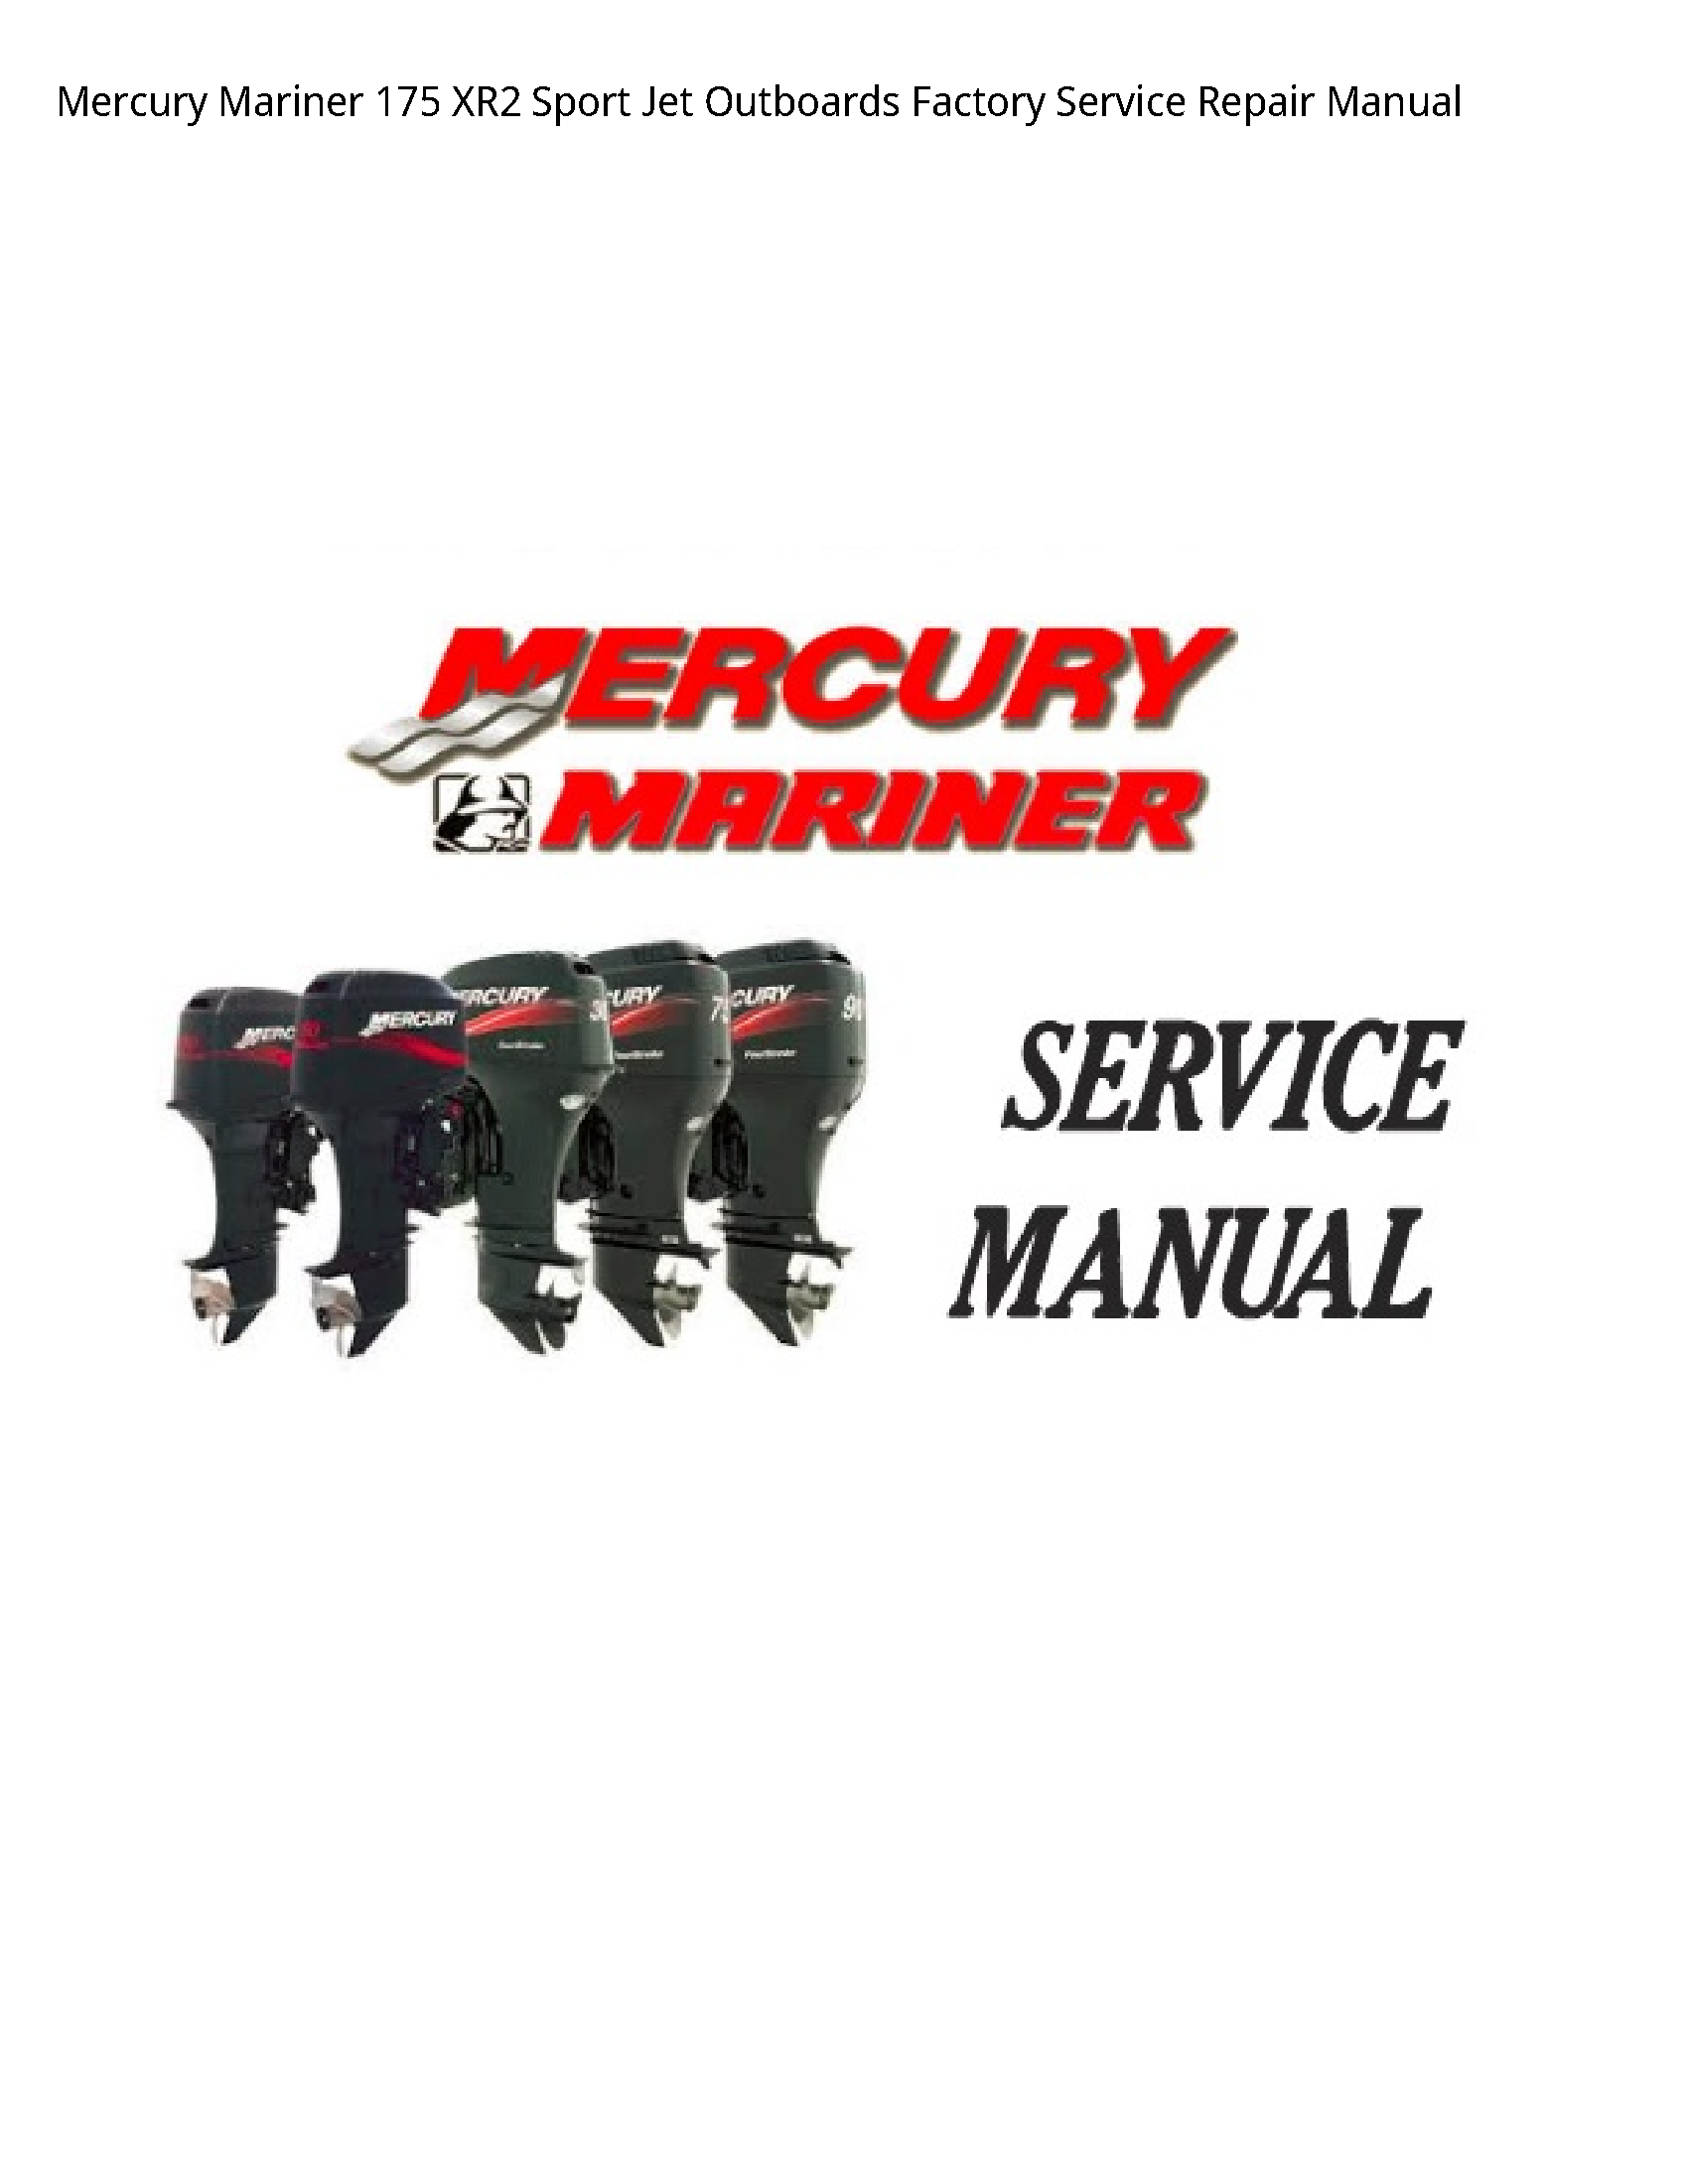 Mercury Mariner 175 Sport Jet Outboards Factory manual